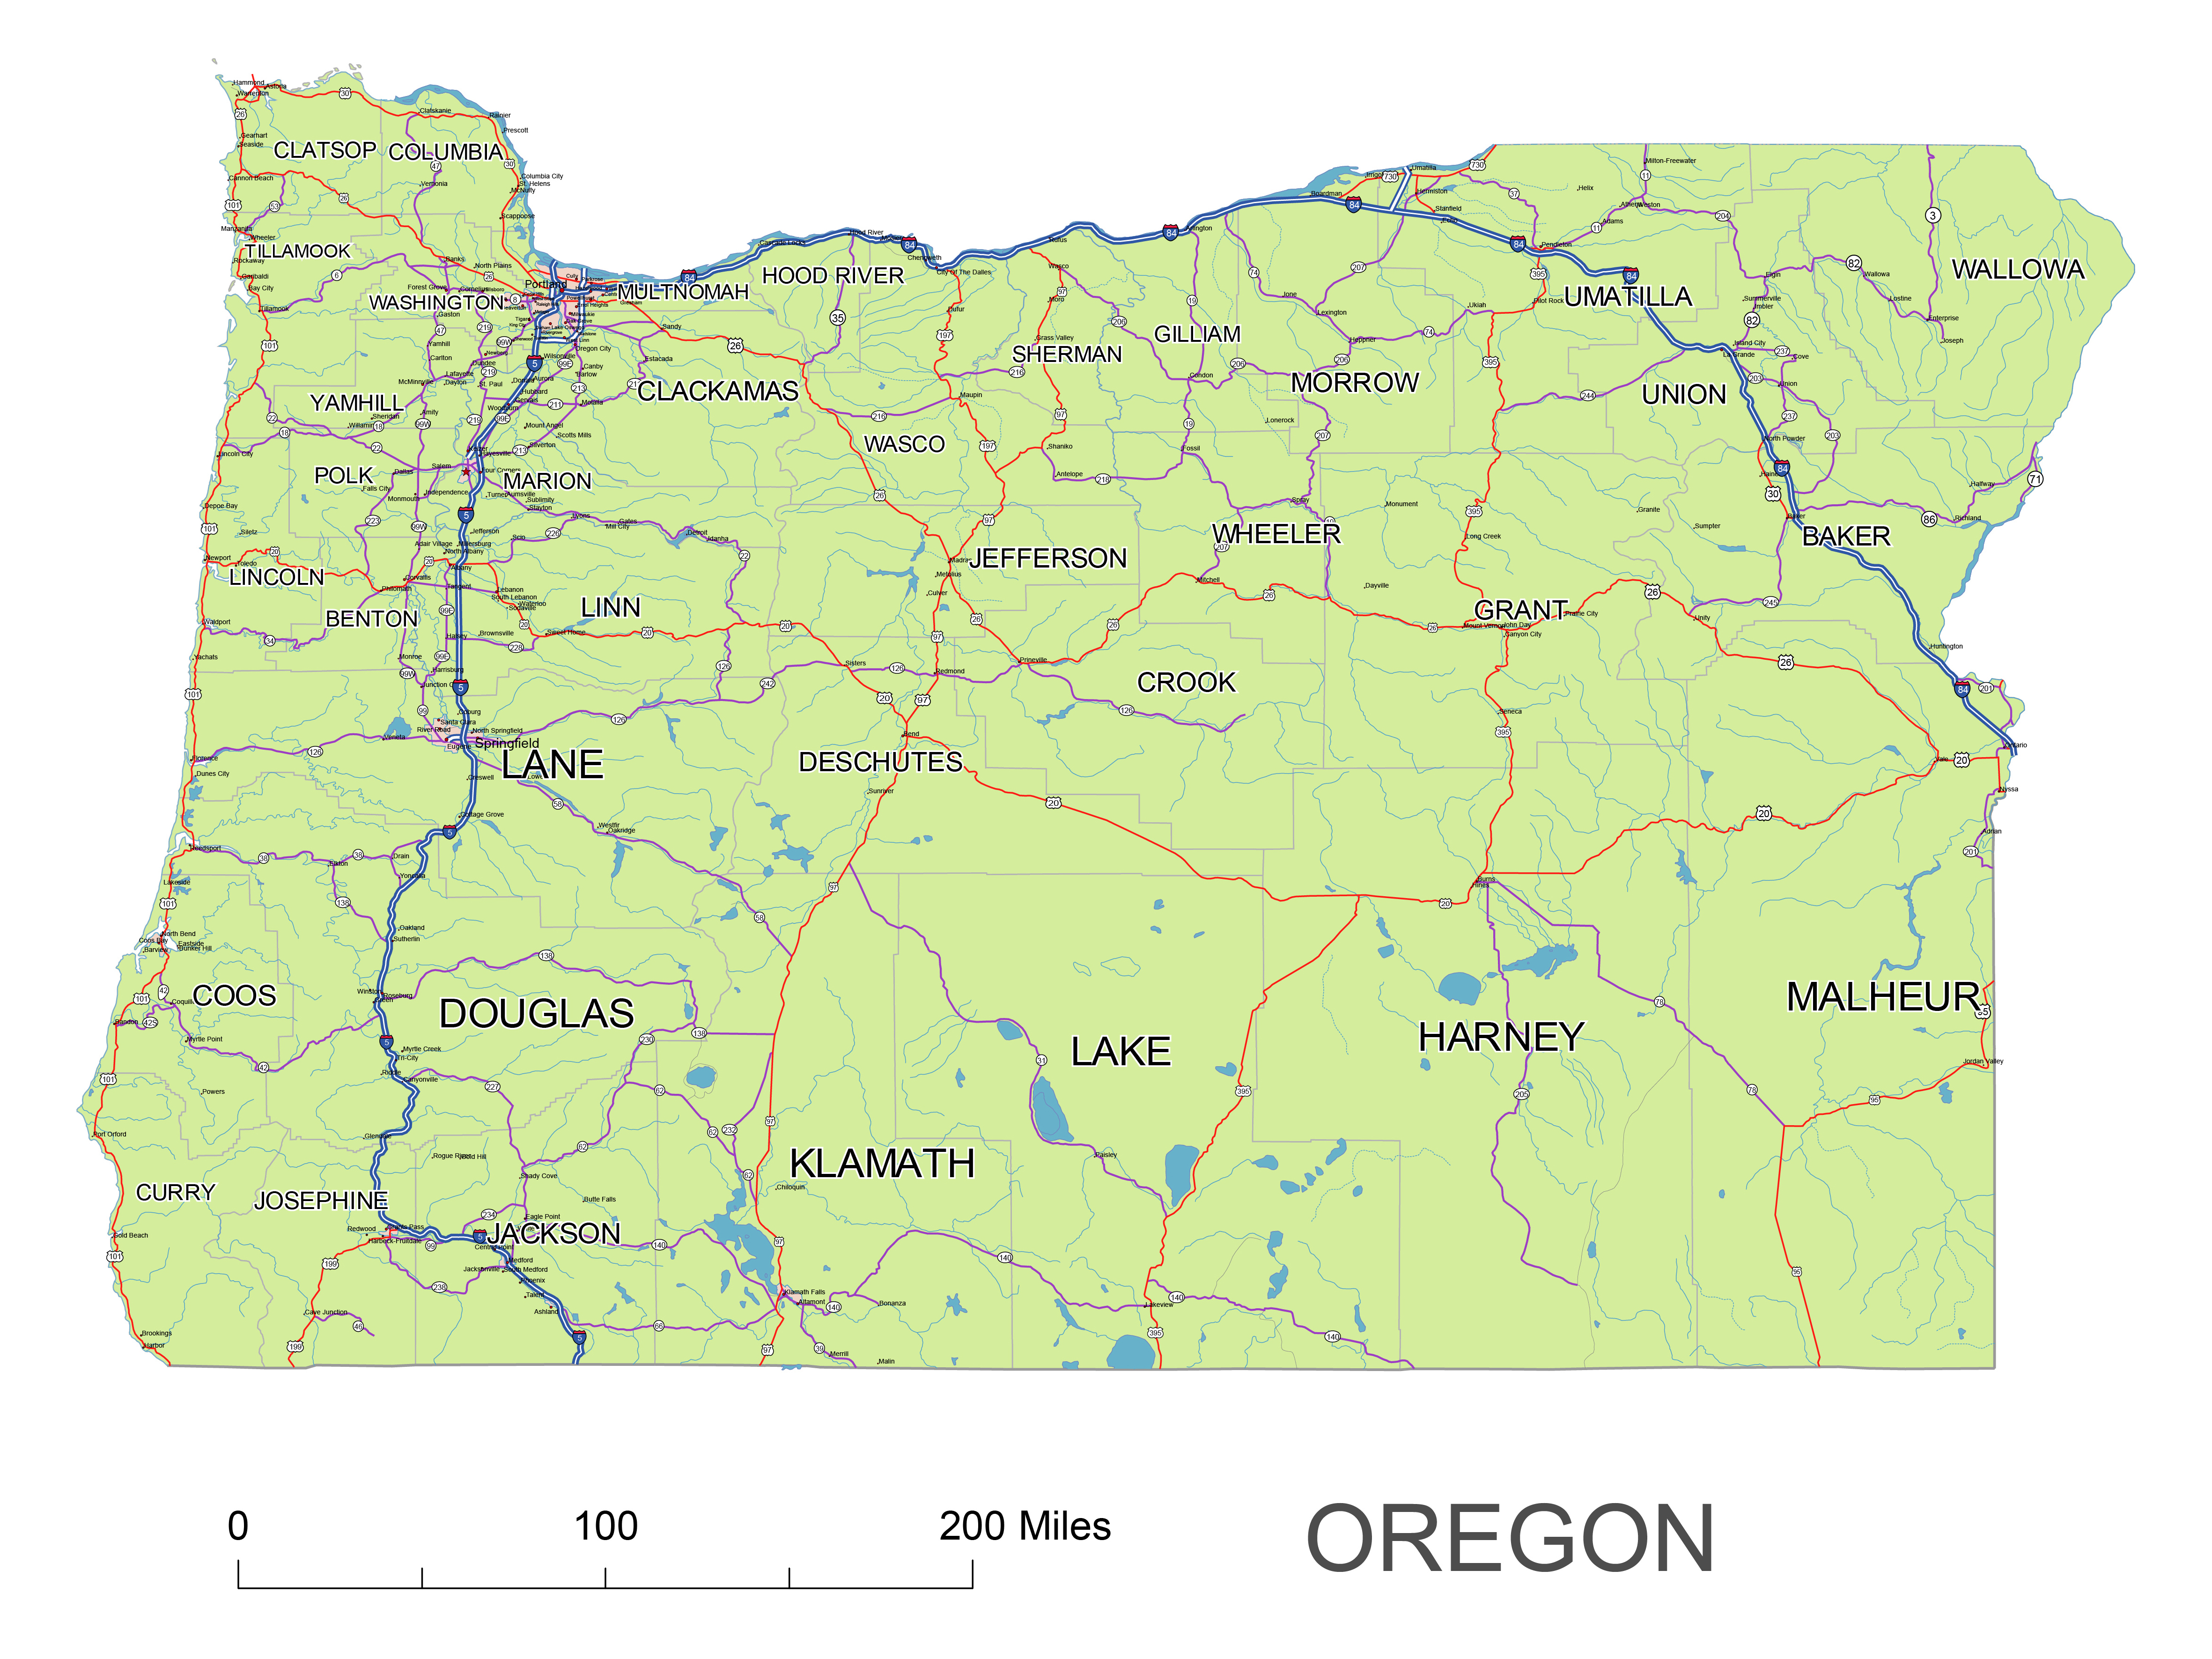 Oregon State vector road map. lossless scalable AI,PDF map for printing